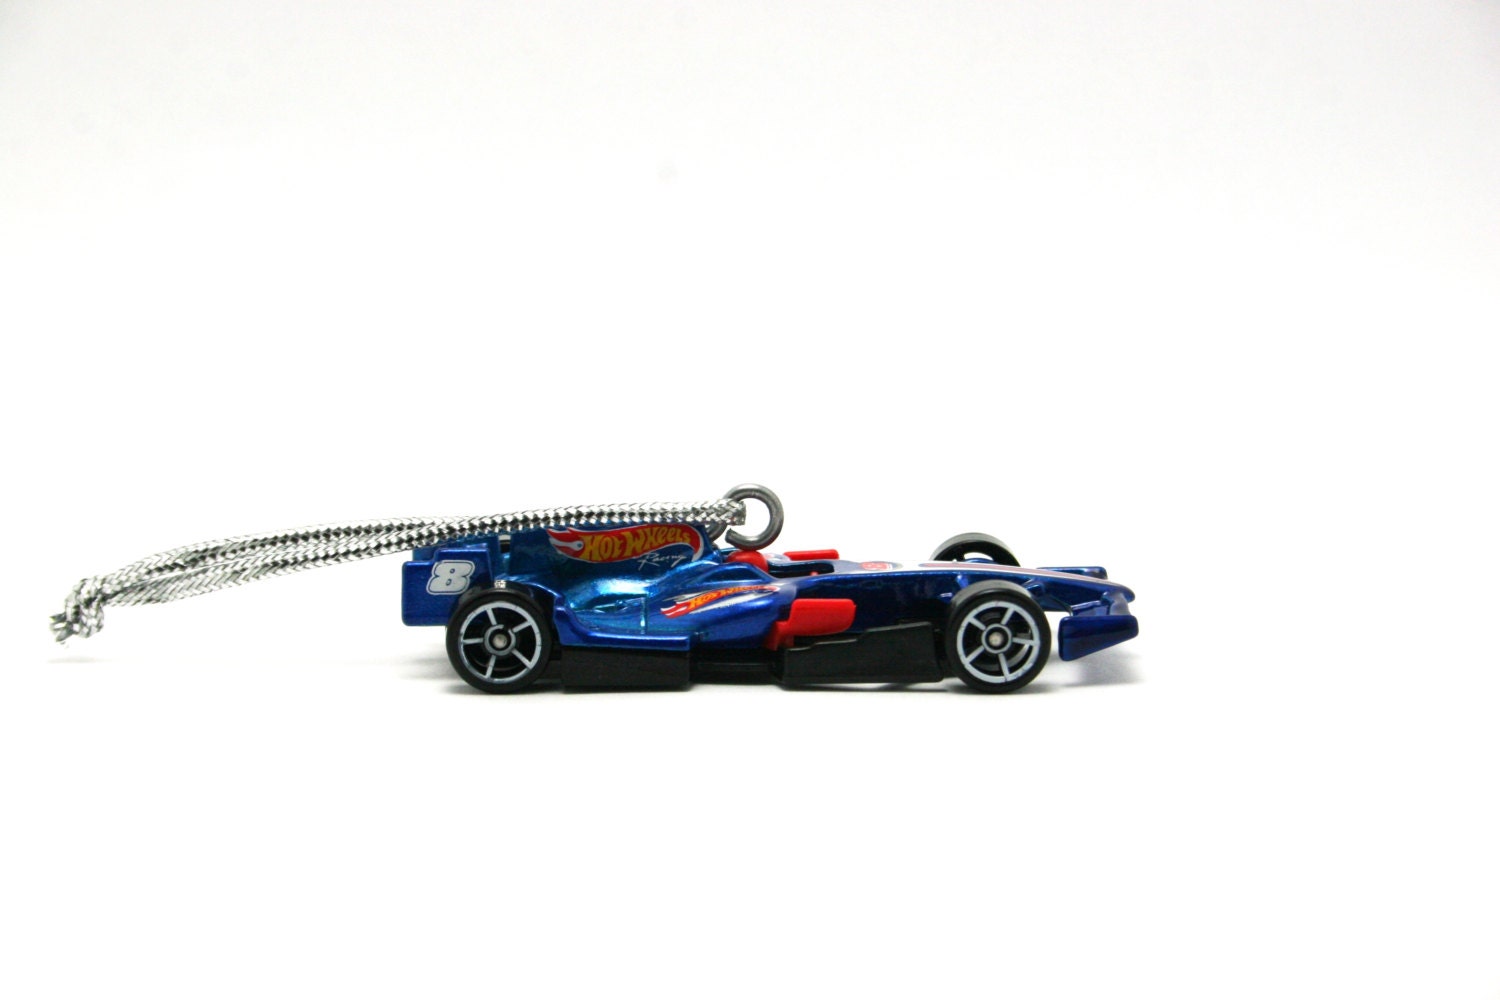 Formula F1 Racer Hot Wheels Ornament by LuxoResale on Etsy